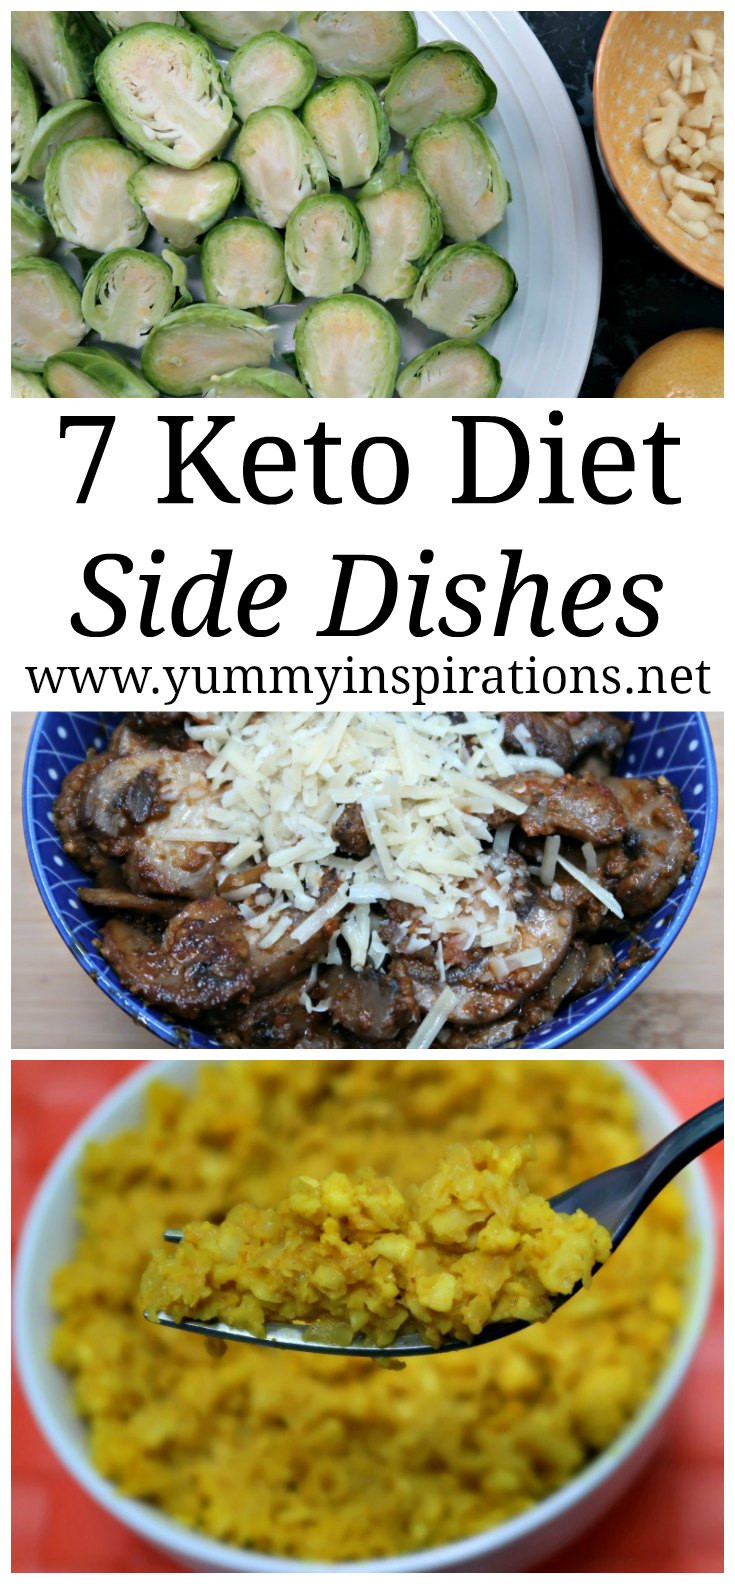 Low Carb Keto Side Dishes
 7 Keto Side Dishes Easy Low Carb Sides LCHF Recipes